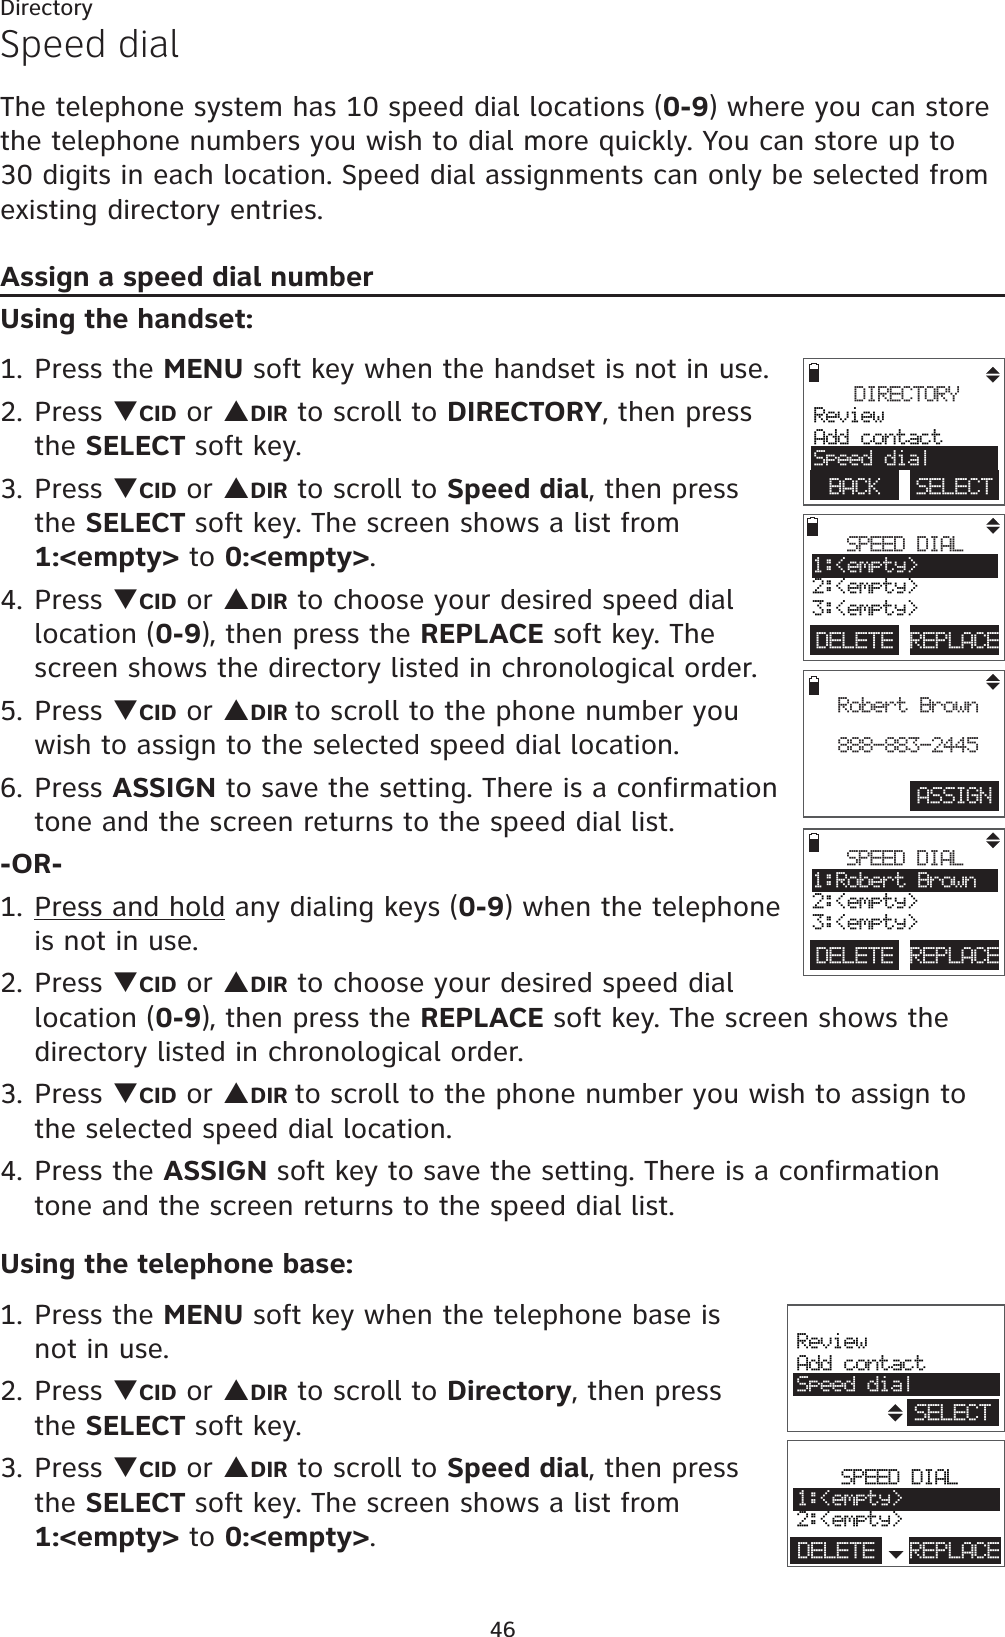 46DirectorySpeed dialThe telephone system has 10 speed dial locations (0-9) where you can store the telephone numbers you wish to dial more quickly. You can store up to 30 digits in each location. Speed dial assignments can only be selected from existing directory entries.Assign a speed dial numberUsing the handset:1. Press the MENU soft key when the handset is not in use.2. Press TCID or SDIR to scroll to DIRECTORY, then press the SELECT soft key.3. Press TCID or SDIR to scroll to Speed dial, then press the SELECT soft key. The screen shows a list from 1:&lt;empty&gt; to 0:&lt;empty&gt;.4. Press TCID or SDIR to choose your desired speed dial location (0-9), then press the REPLACE soft key. The screen shows the directory listed in chronological order.5. Press TCID or SDIR to scroll to the phone number you wish to assign to the selected speed dial location.6. Press ASSIGN to save the setting. There is a confirmation tone and the screen returns to the speed dial list.-OR-1. Press and hold any dialing keys (0-9) when the telephone is not in use.2. Press TCID or SDIR to choose your desired speed dial location (0-9), then press the REPLACE soft key. The screen shows the directory listed in chronological order.3. Press TCID or SDIR to scroll to the phone number you wish to assign to the selected speed dial location.4. Press the ASSIGN soft key to save the setting. There is a confirmation tone and the screen returns to the speed dial list.Using the telephone base:1. Press the MENU soft key when the telephone base is not in use.2. Press TCID or SDIR to scroll to Directory, then press the SELECT soft key.3. Press TCID or SDIR to scroll to Speed dial, then press the SELECT soft key. The screen shows a list from 1:&lt;empty&gt; to 0:&lt;empty&gt;.ASSIGNRobert Brown888-883-2445DIRECTORYReviewAdd contactSpeed dialBACK    SELECTDELETE REPLACESPEED DIAL1:&lt;empty&gt;2:&lt;empty&gt;3:&lt;empty&gt;DELETE REPLACESPEED DIAL1:Robert Brown2:&lt;empty&gt;3:&lt;empty&gt;ReviewAdd contactSpeed dialSELECTSPEED DIAL1:&lt;empty&gt;2:&lt;empty&gt;DELETE REPLACE